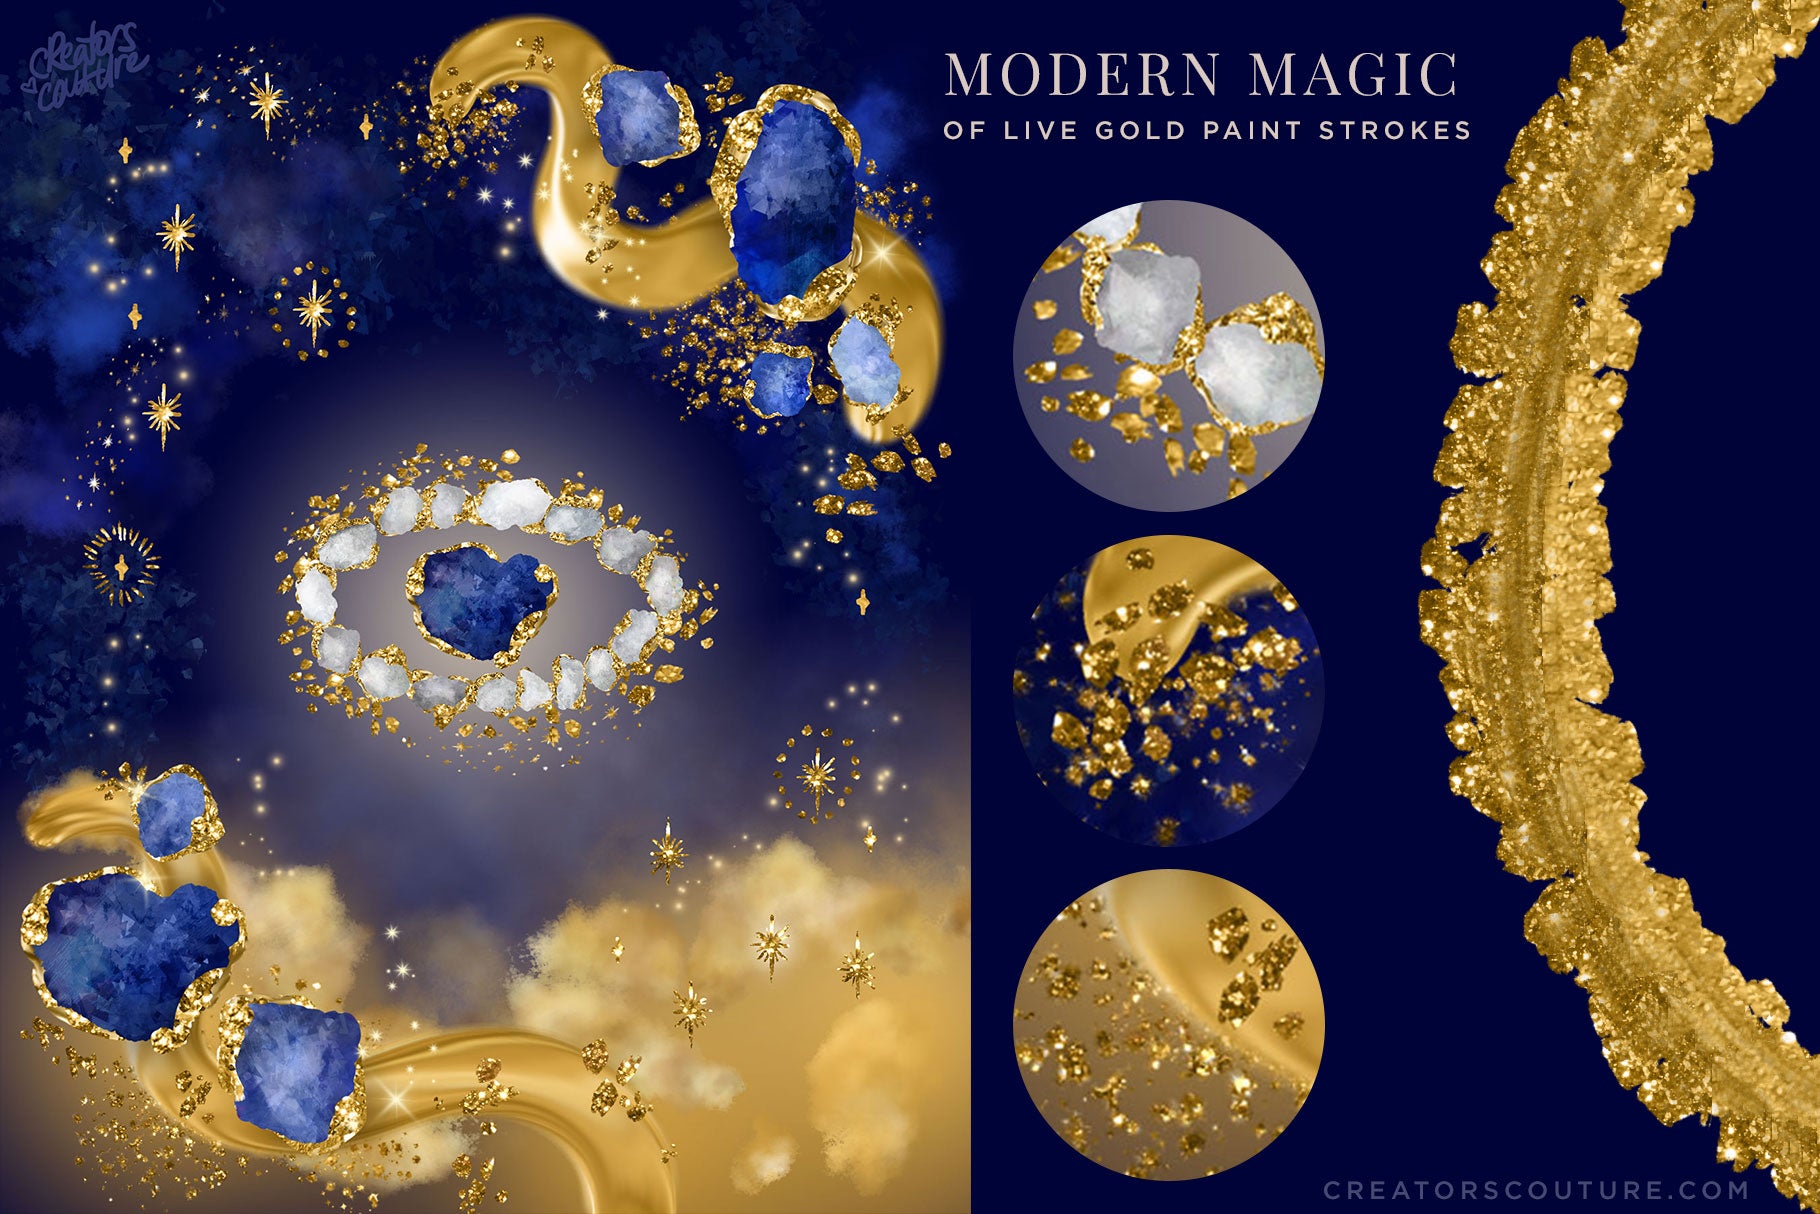 mystical gold paint stroke artwork made with 24k gold photoshop brushes